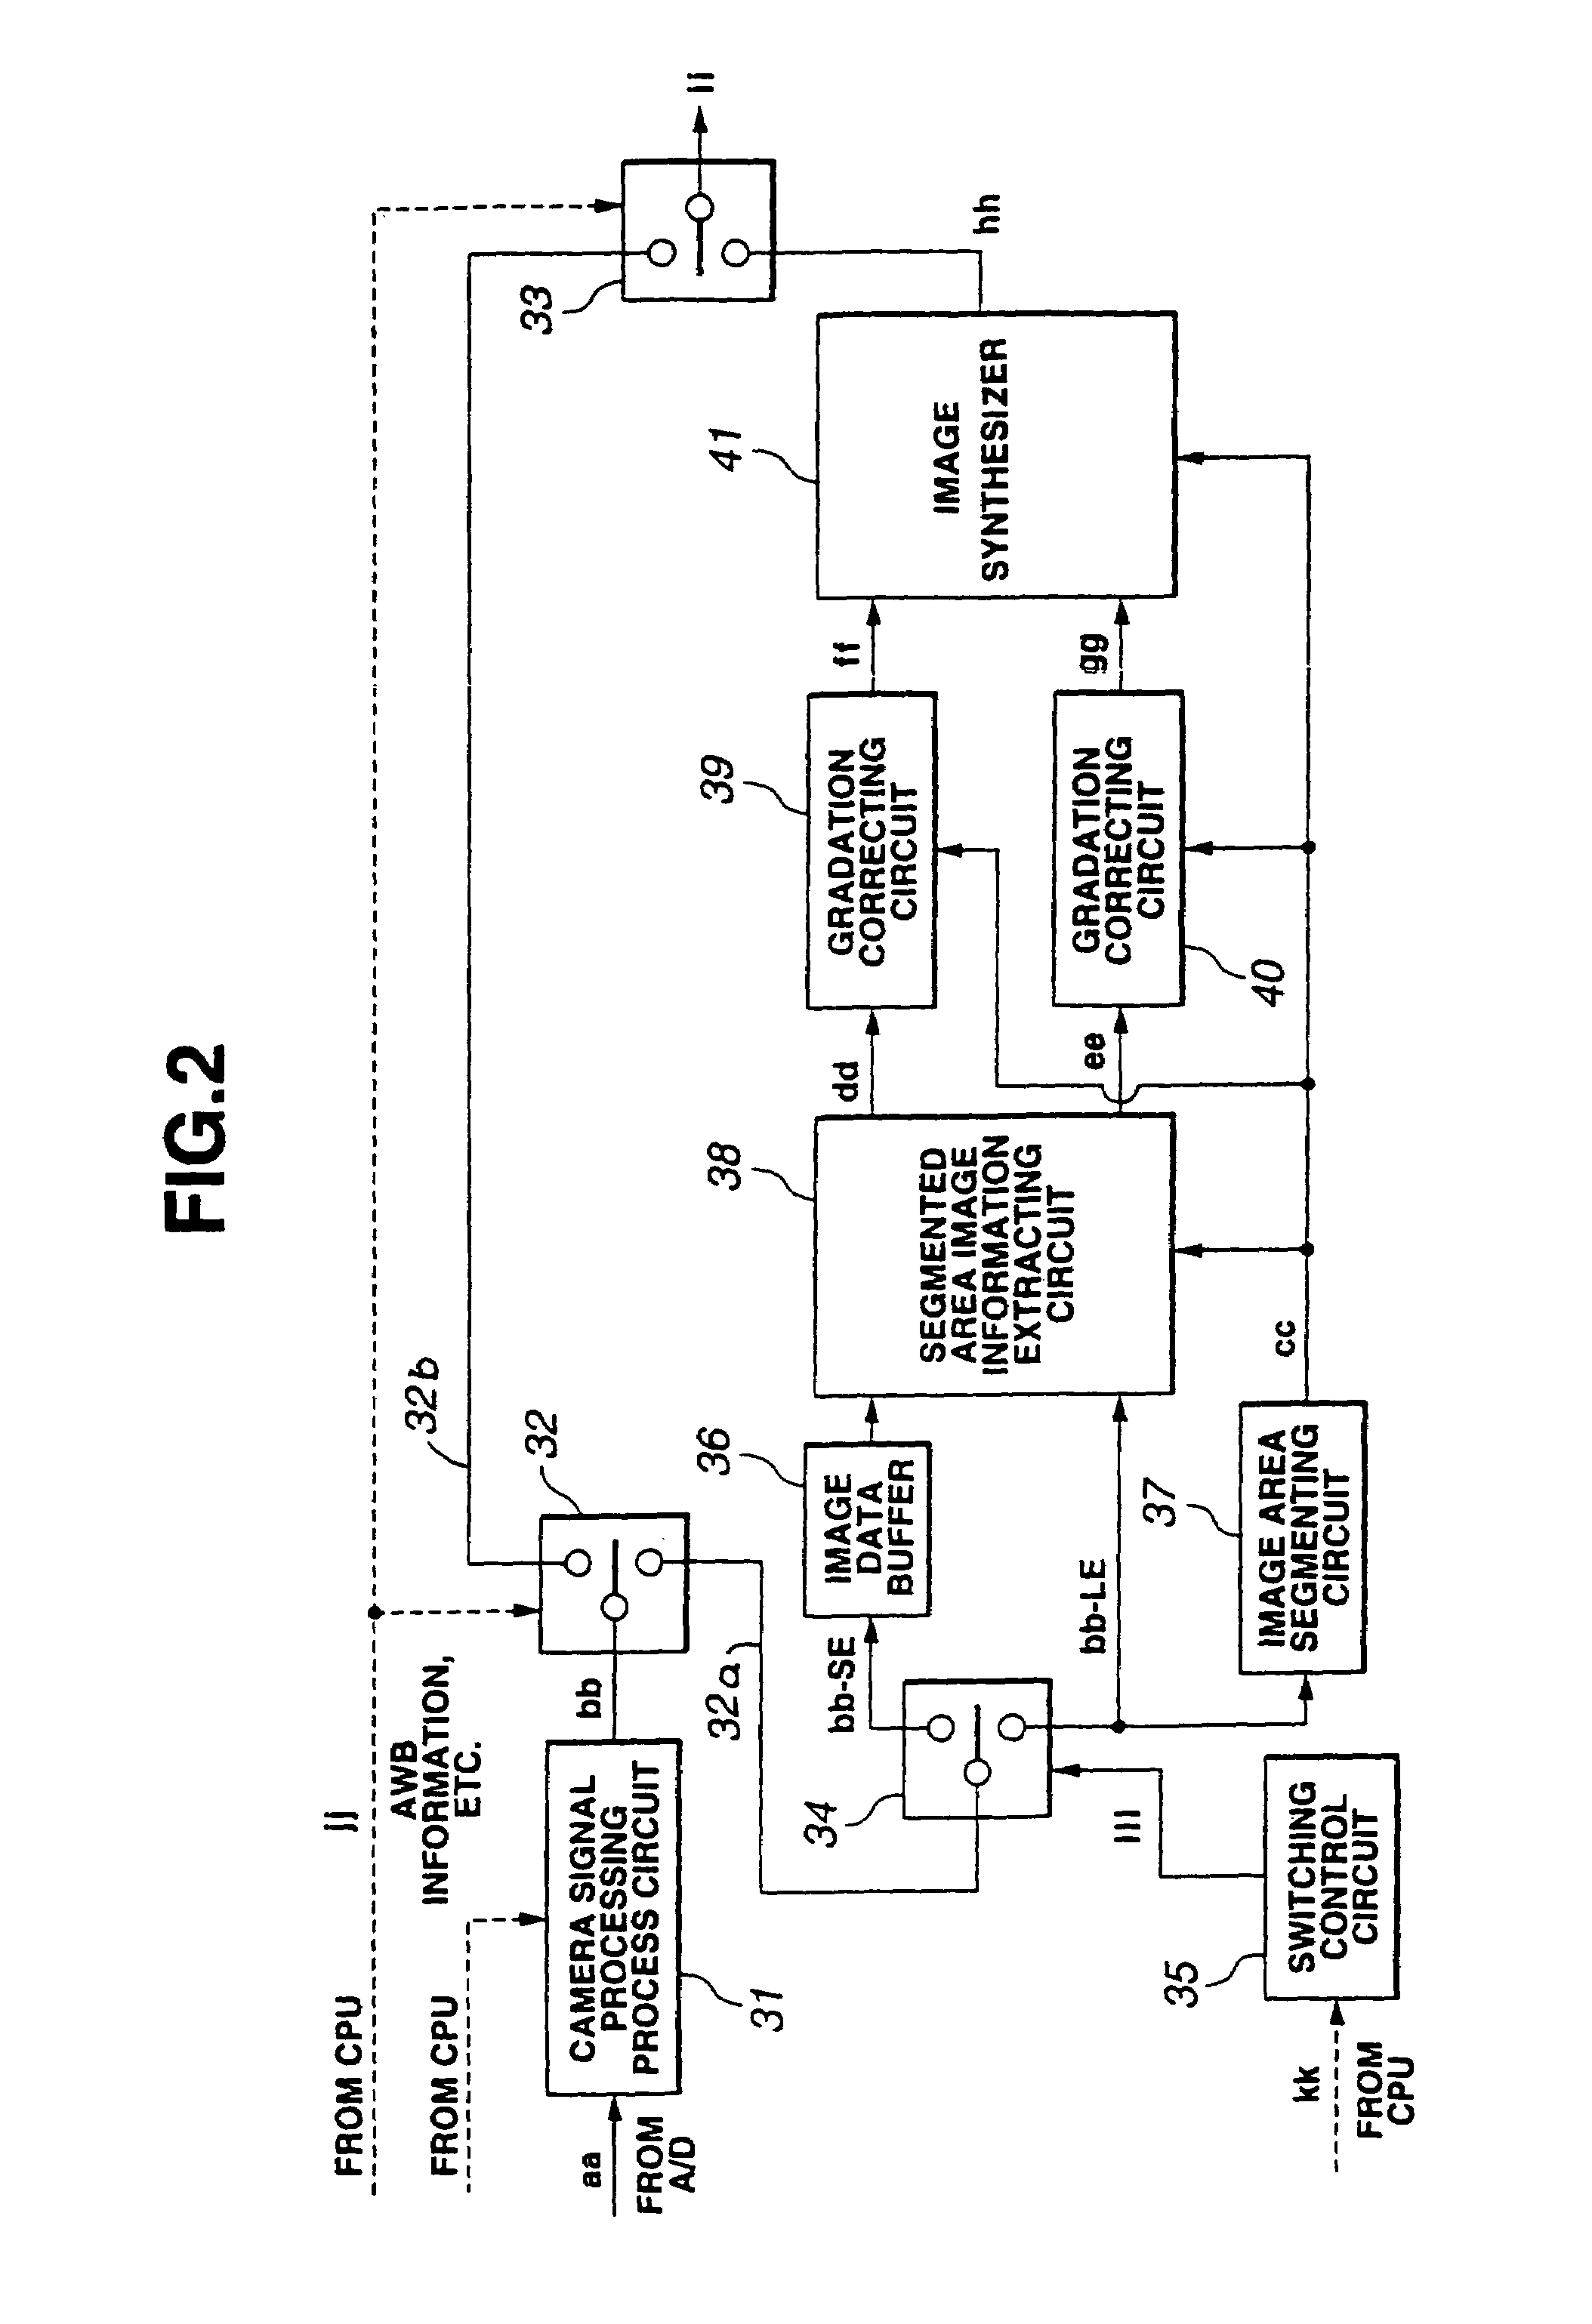 Image processing apparatus for generating a wide dynamic range image